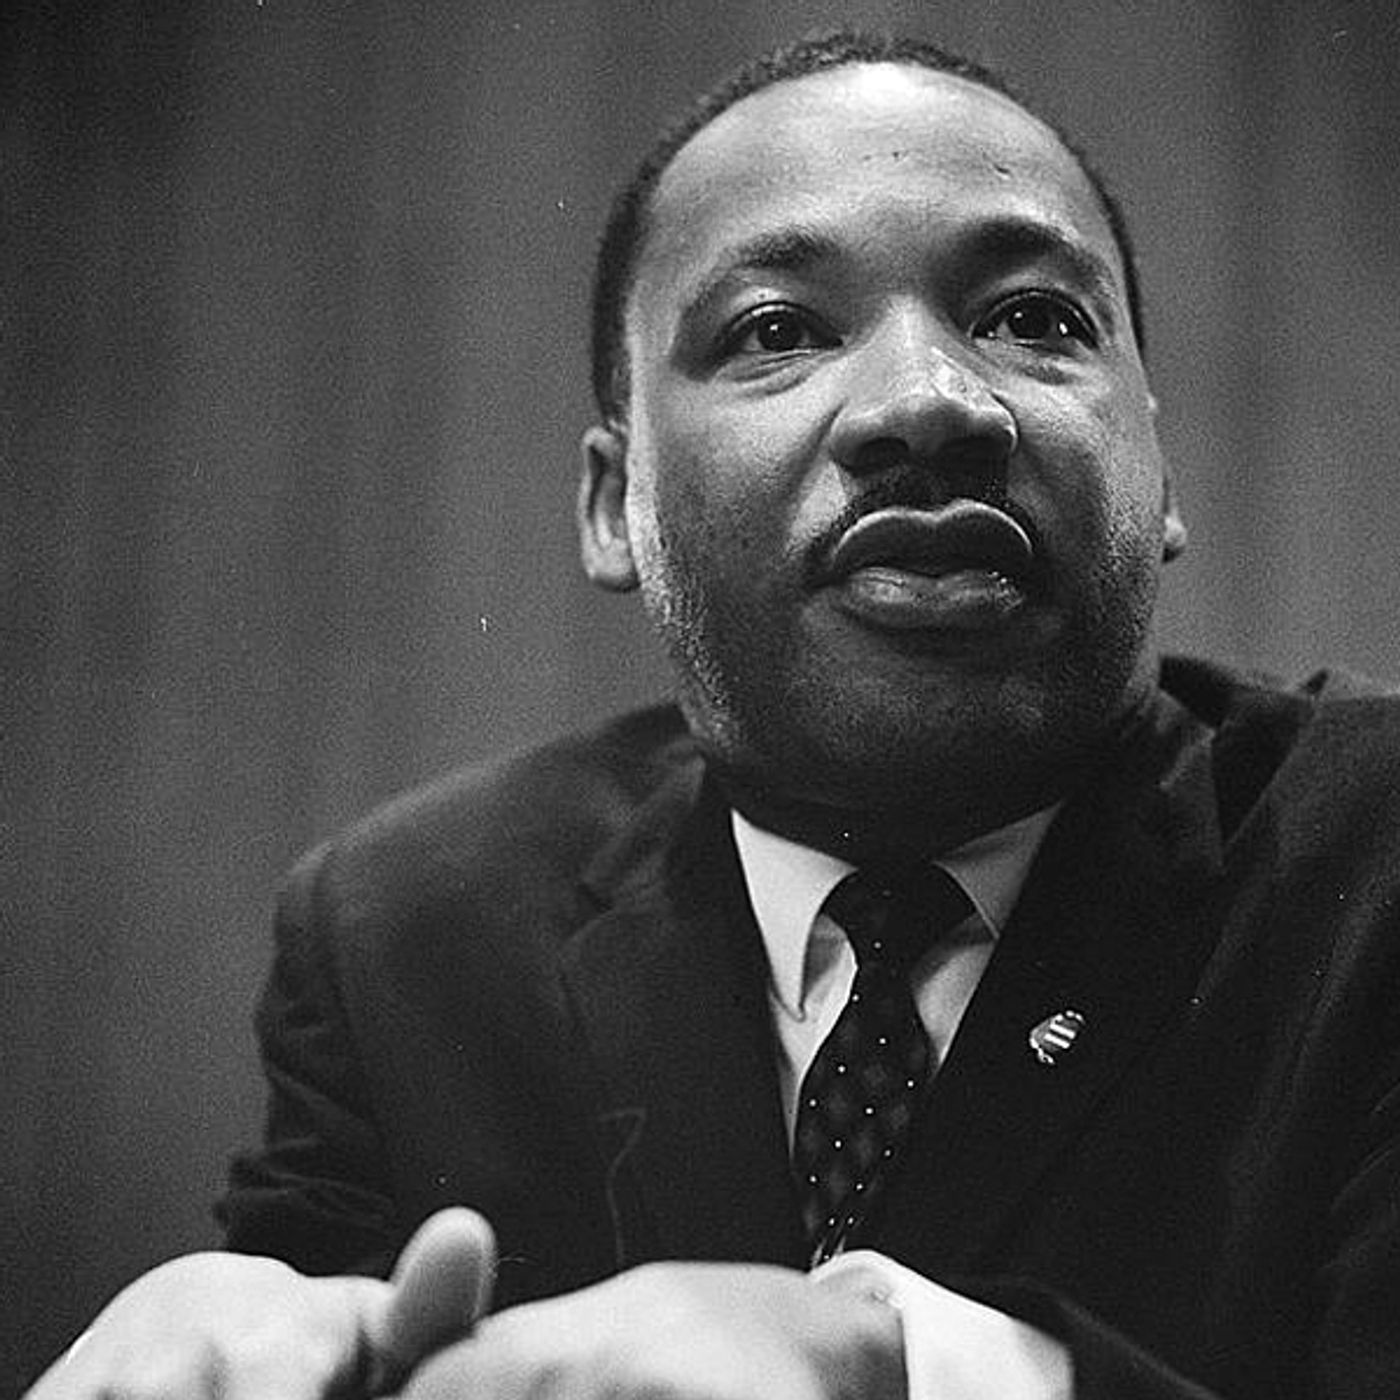 235: The Real Martin Luther King: Reflecting on MLK 50 Years After His Death